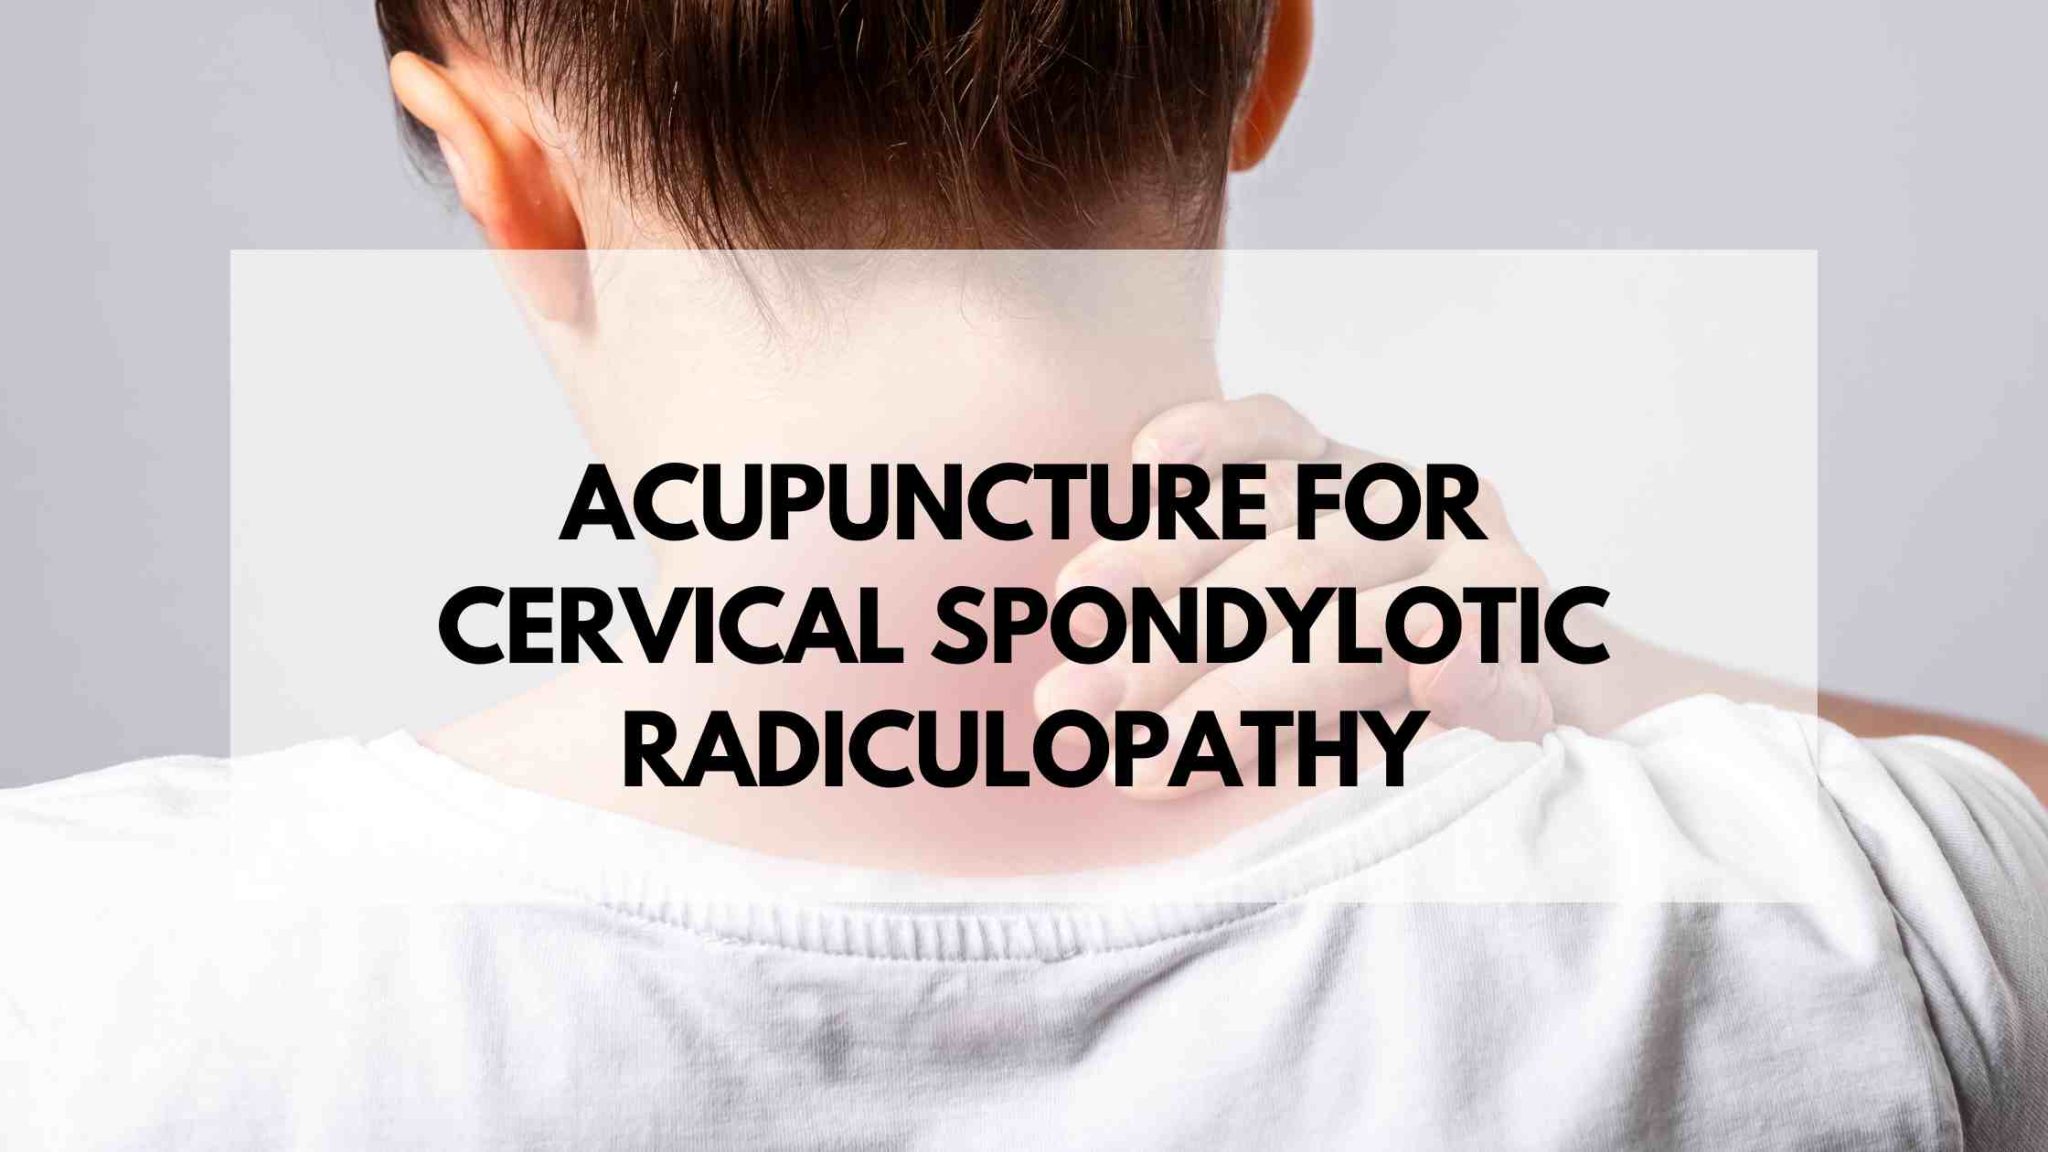 Acupuncture For Cervical Spondylotic Radiculopathy Acupuncture Dry Needling Prolotherapy In